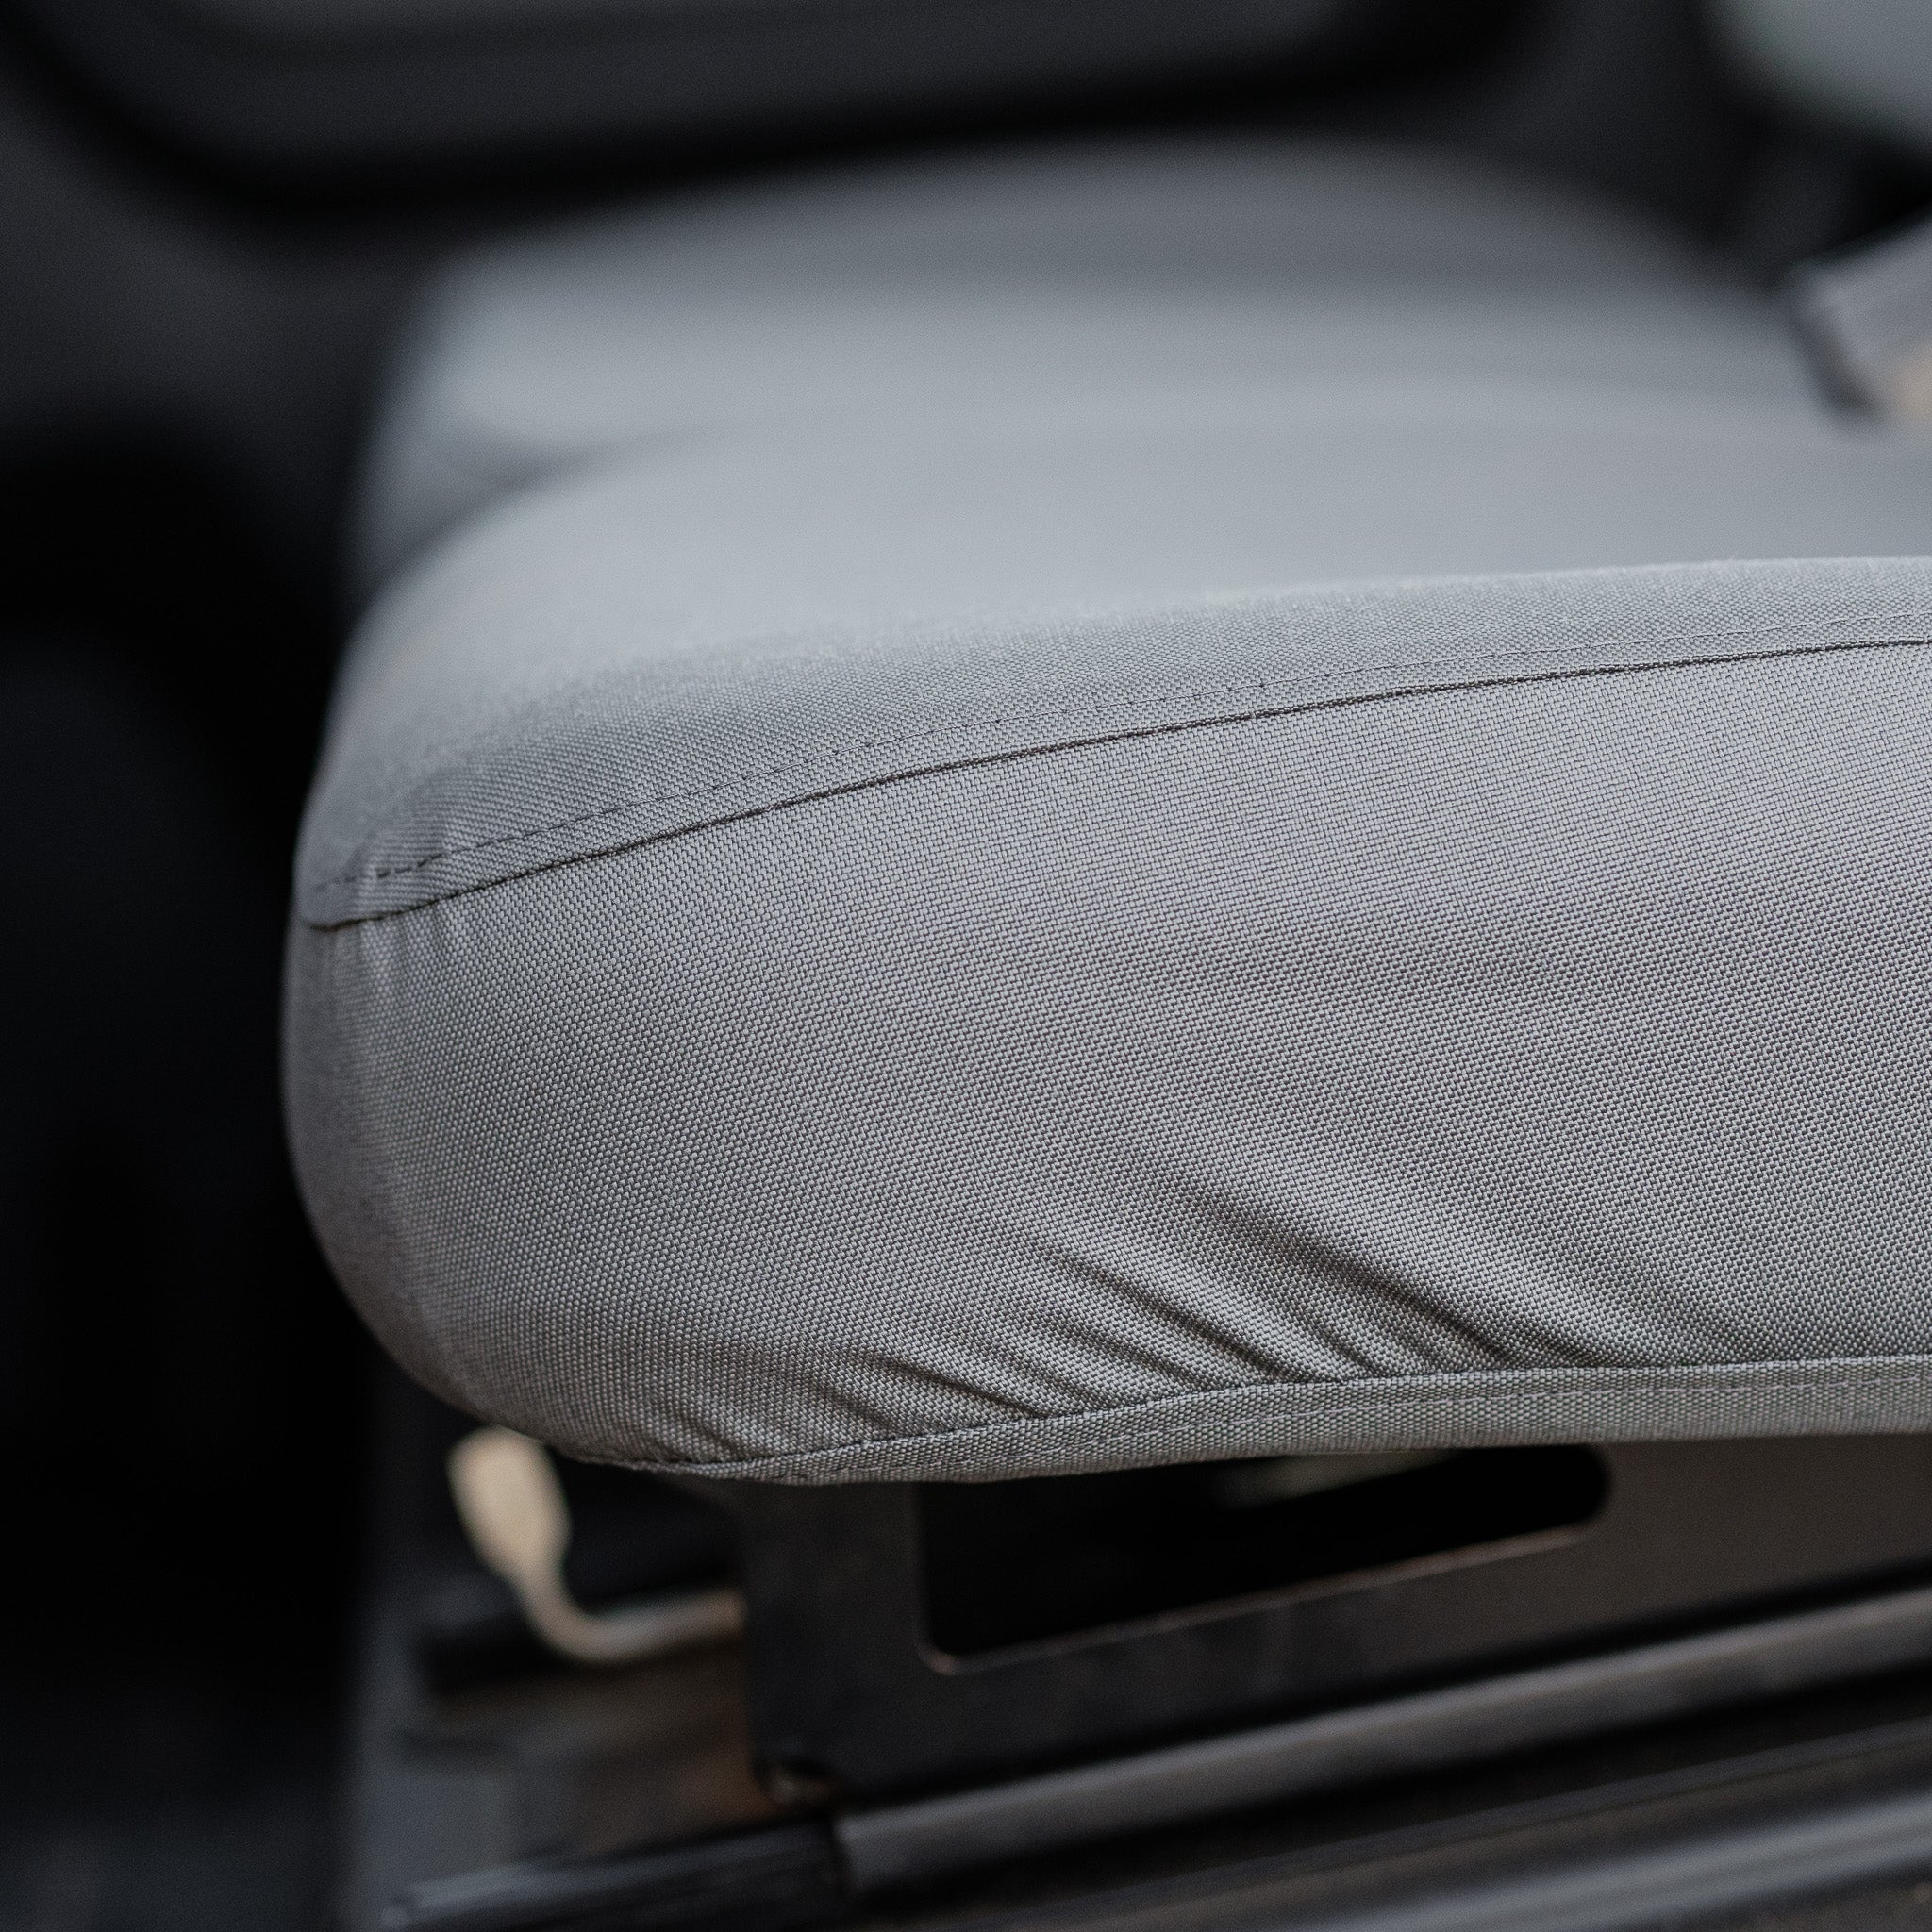 A close up on the seams of the TigerTough seat cover. The covers are extremely durable and perfect for side-by-sides, ATVs, and UTVs that get a lot of wear and tear.